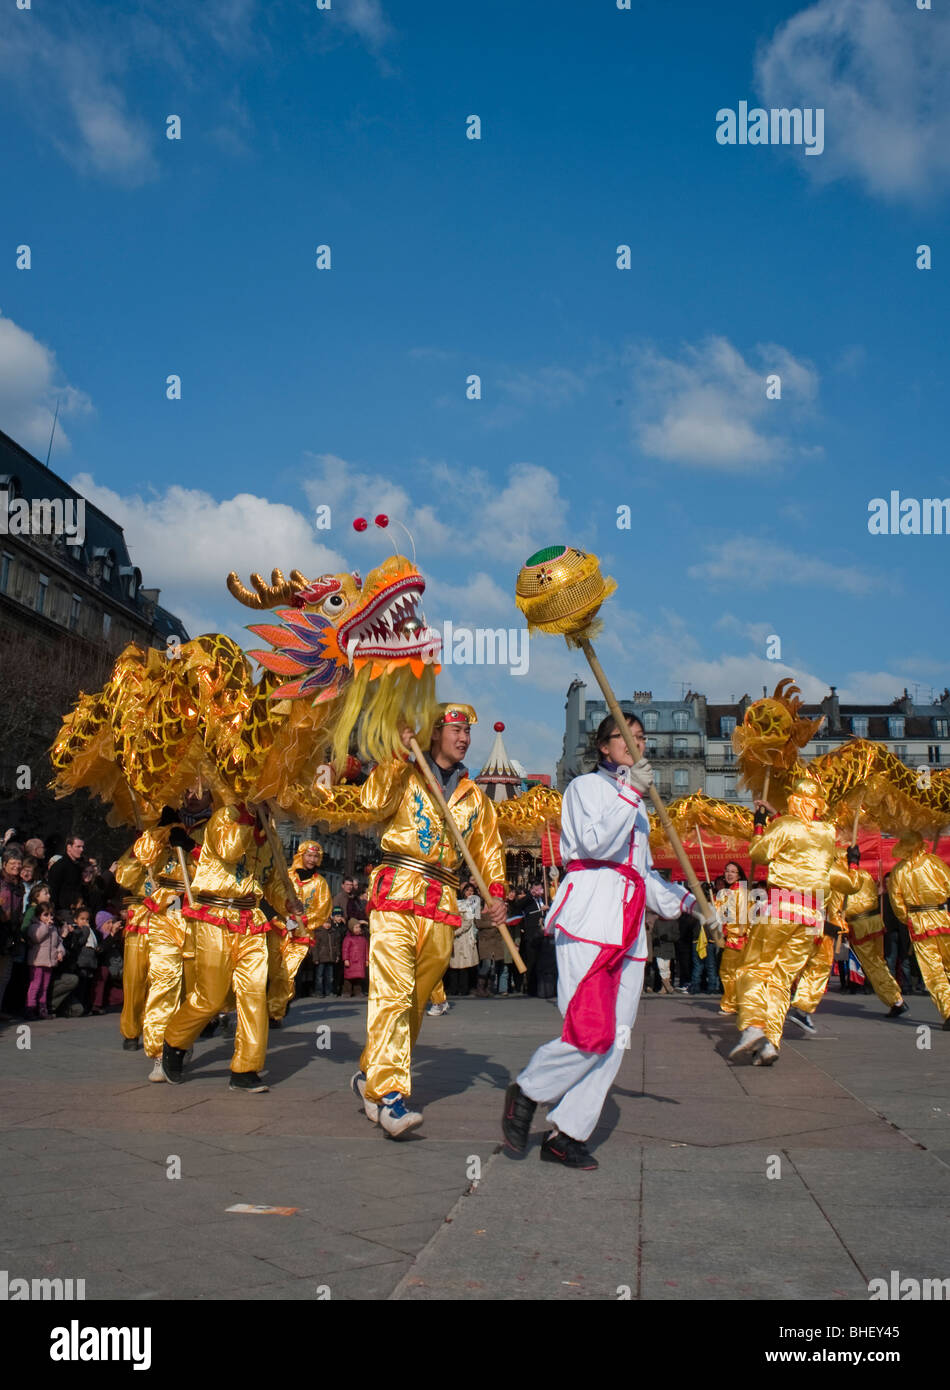 Paris, France, Large Group People in Colorful Costumes, Asians Celebrating 'Chinese New year' Annual Street Carnival Parade, Chinese Dragon Dance Stock Photo